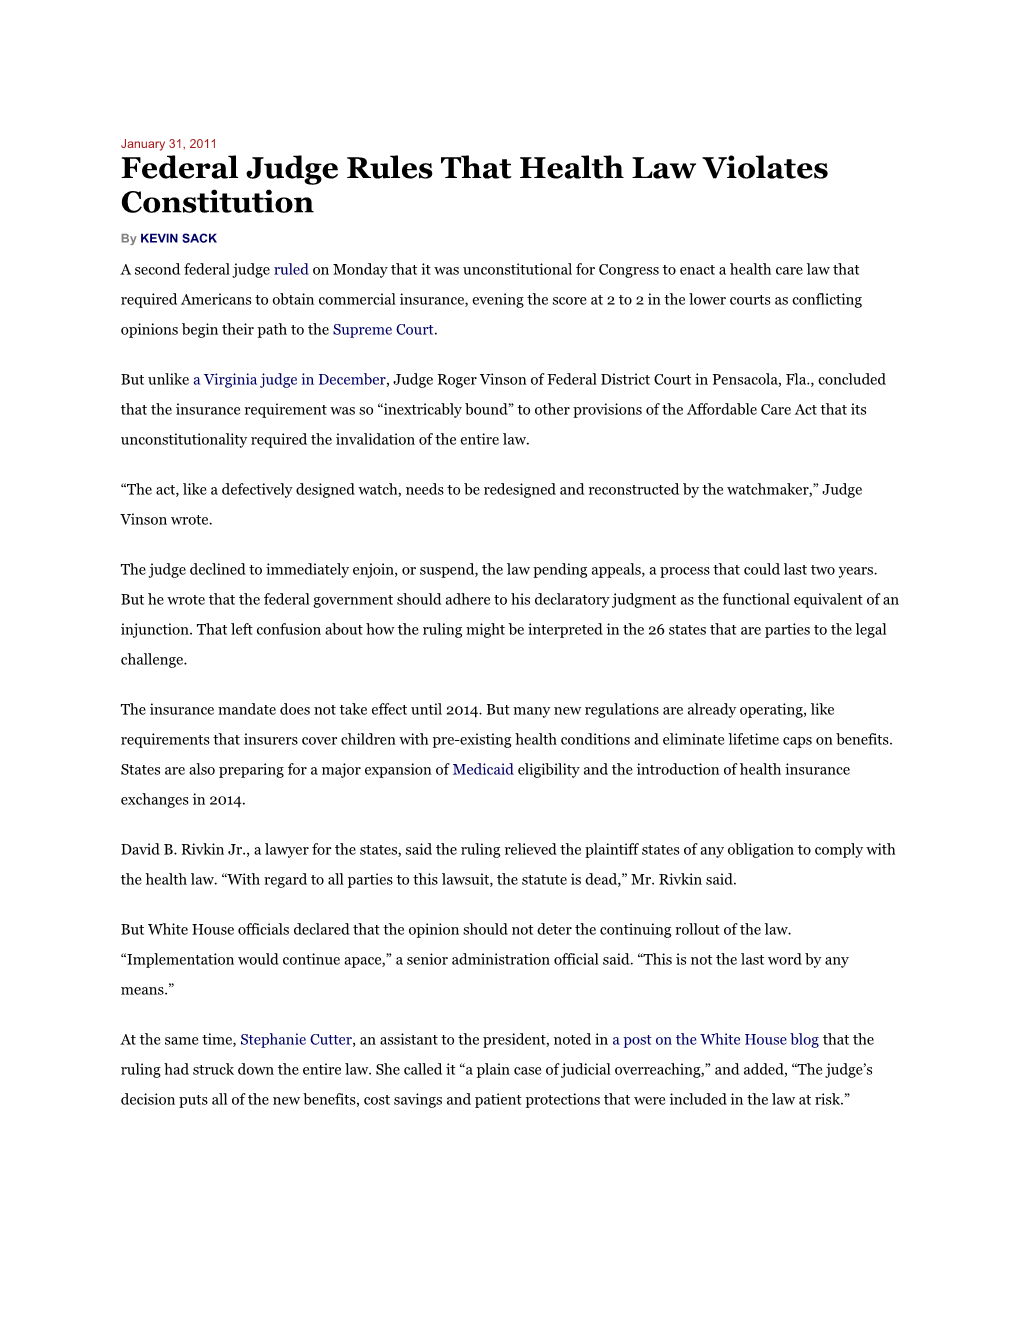 Federal Judge Rules That Health Law Violates Constitution